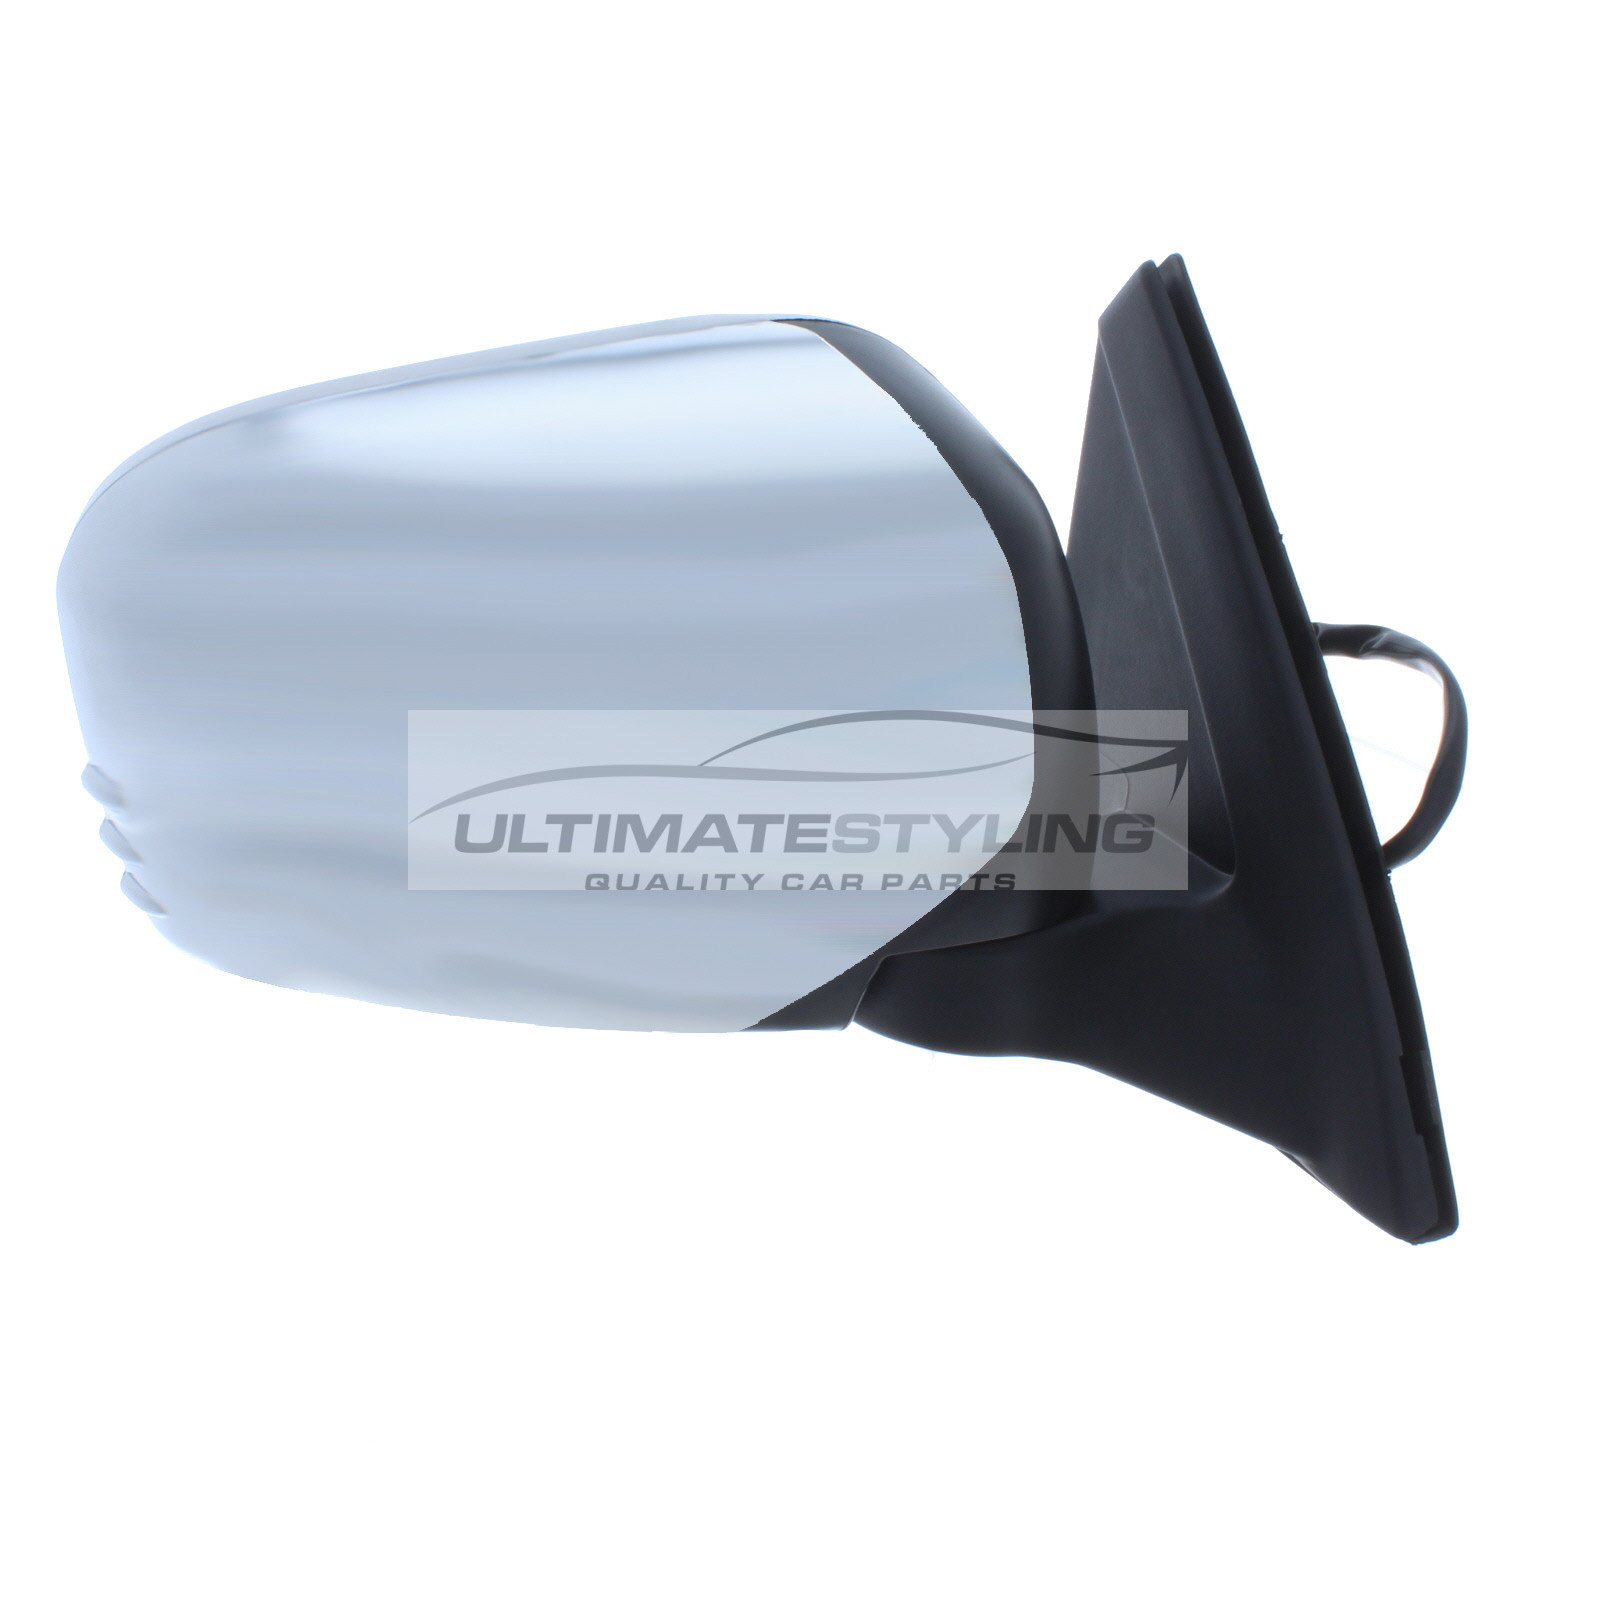 Mitsubishi L200 Wing Mirror / Door Mirror - Drivers Side (RH) - Electric adjustment - Non-Heated Glass - Chrome Finish